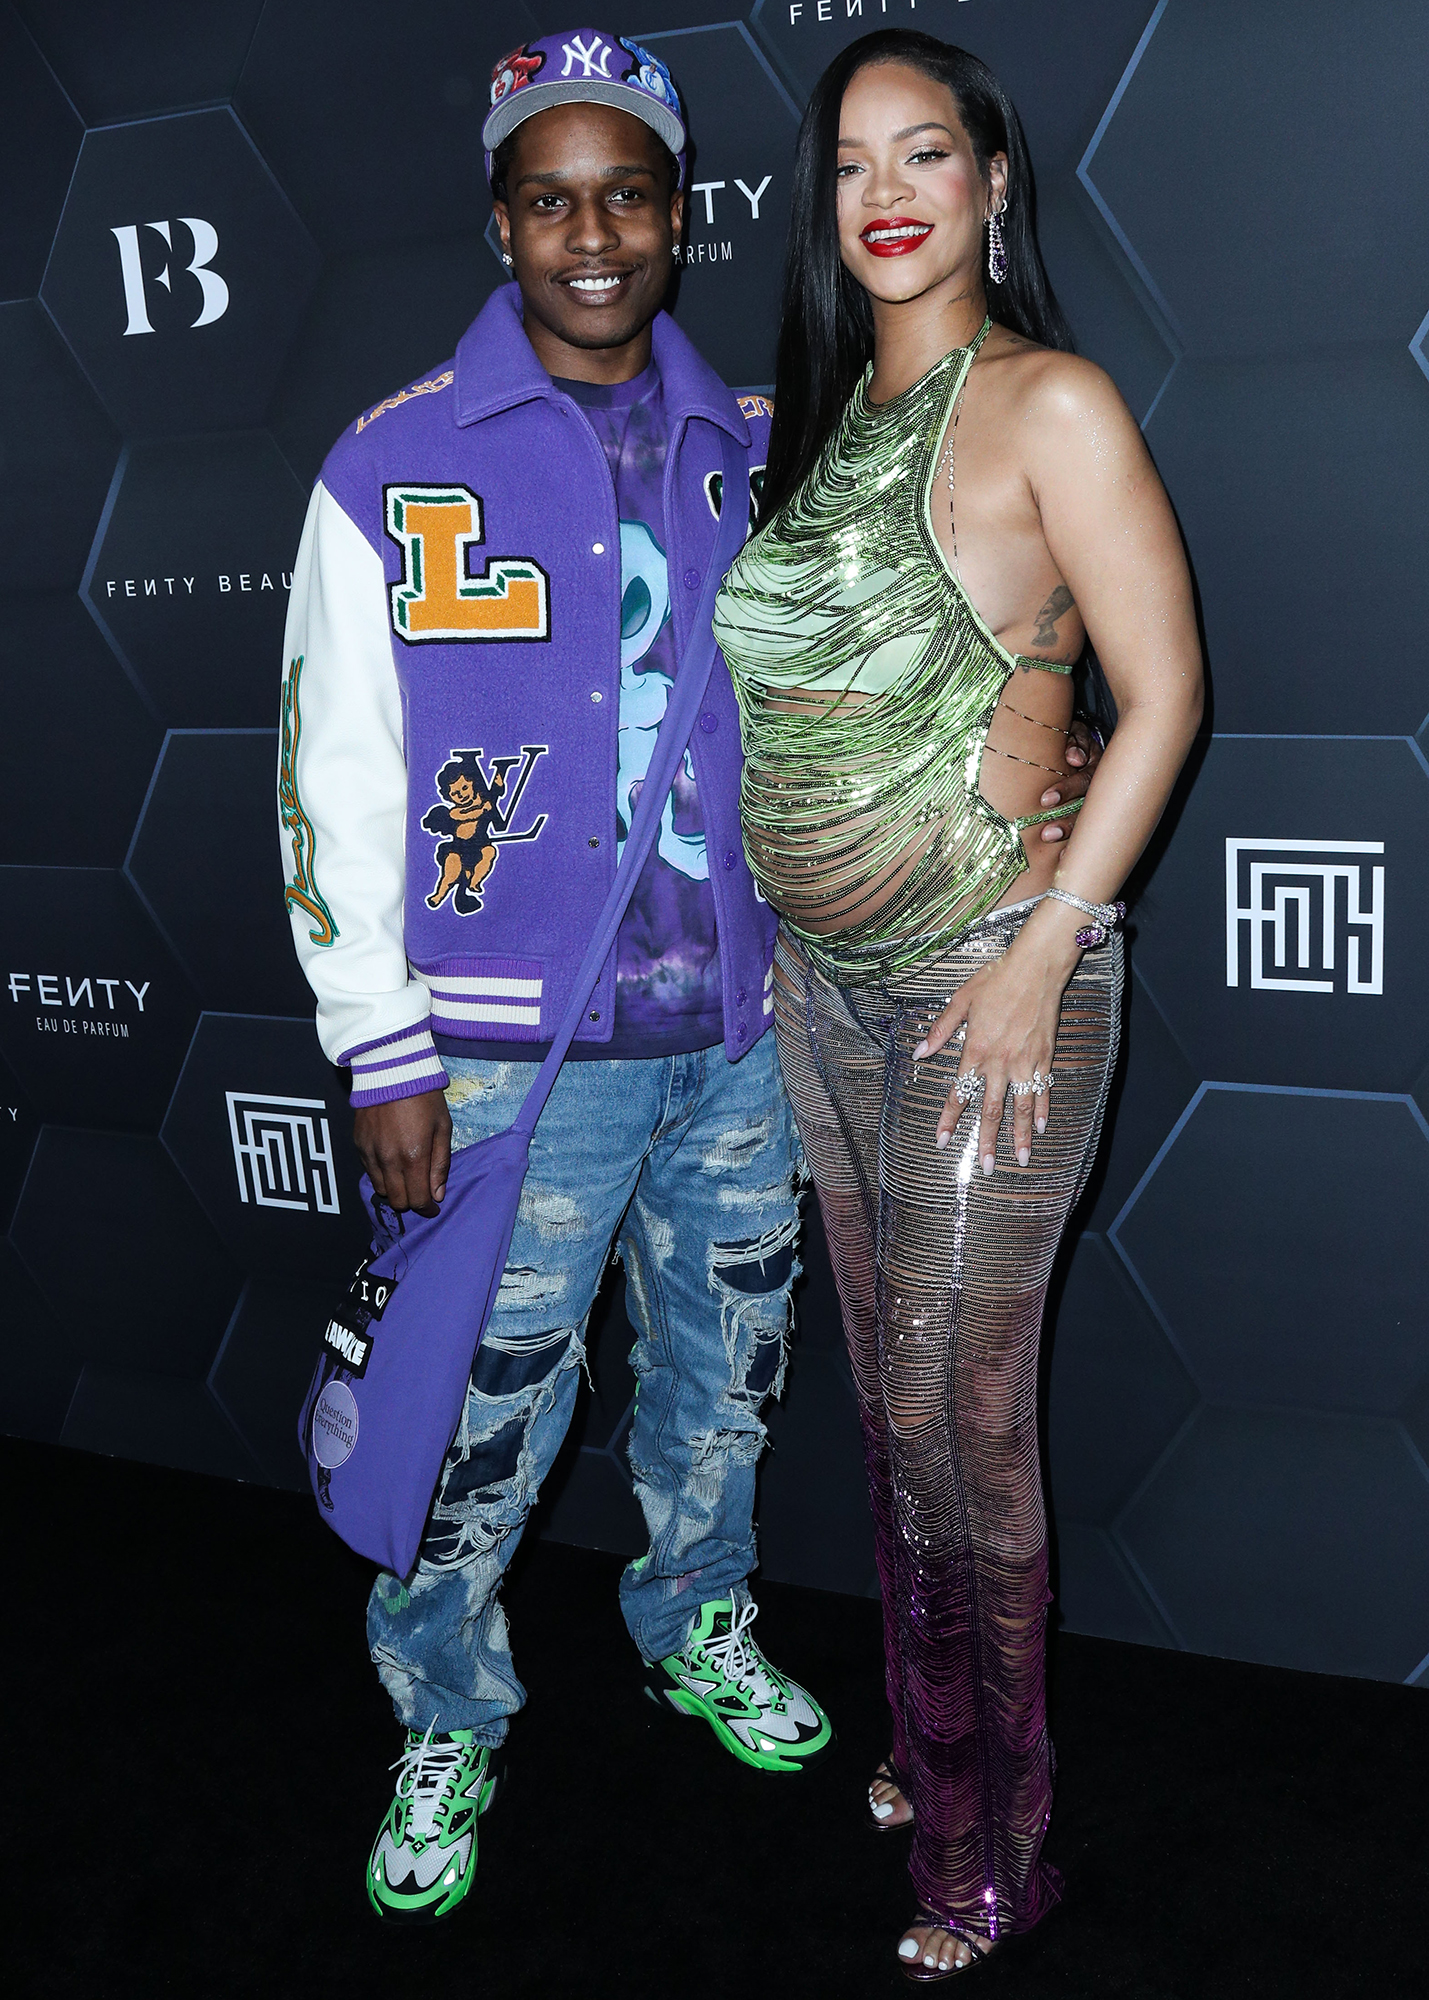 Baby's 1st Red Carpet! Rihanna Proudly Displays Bump at Fenty Event